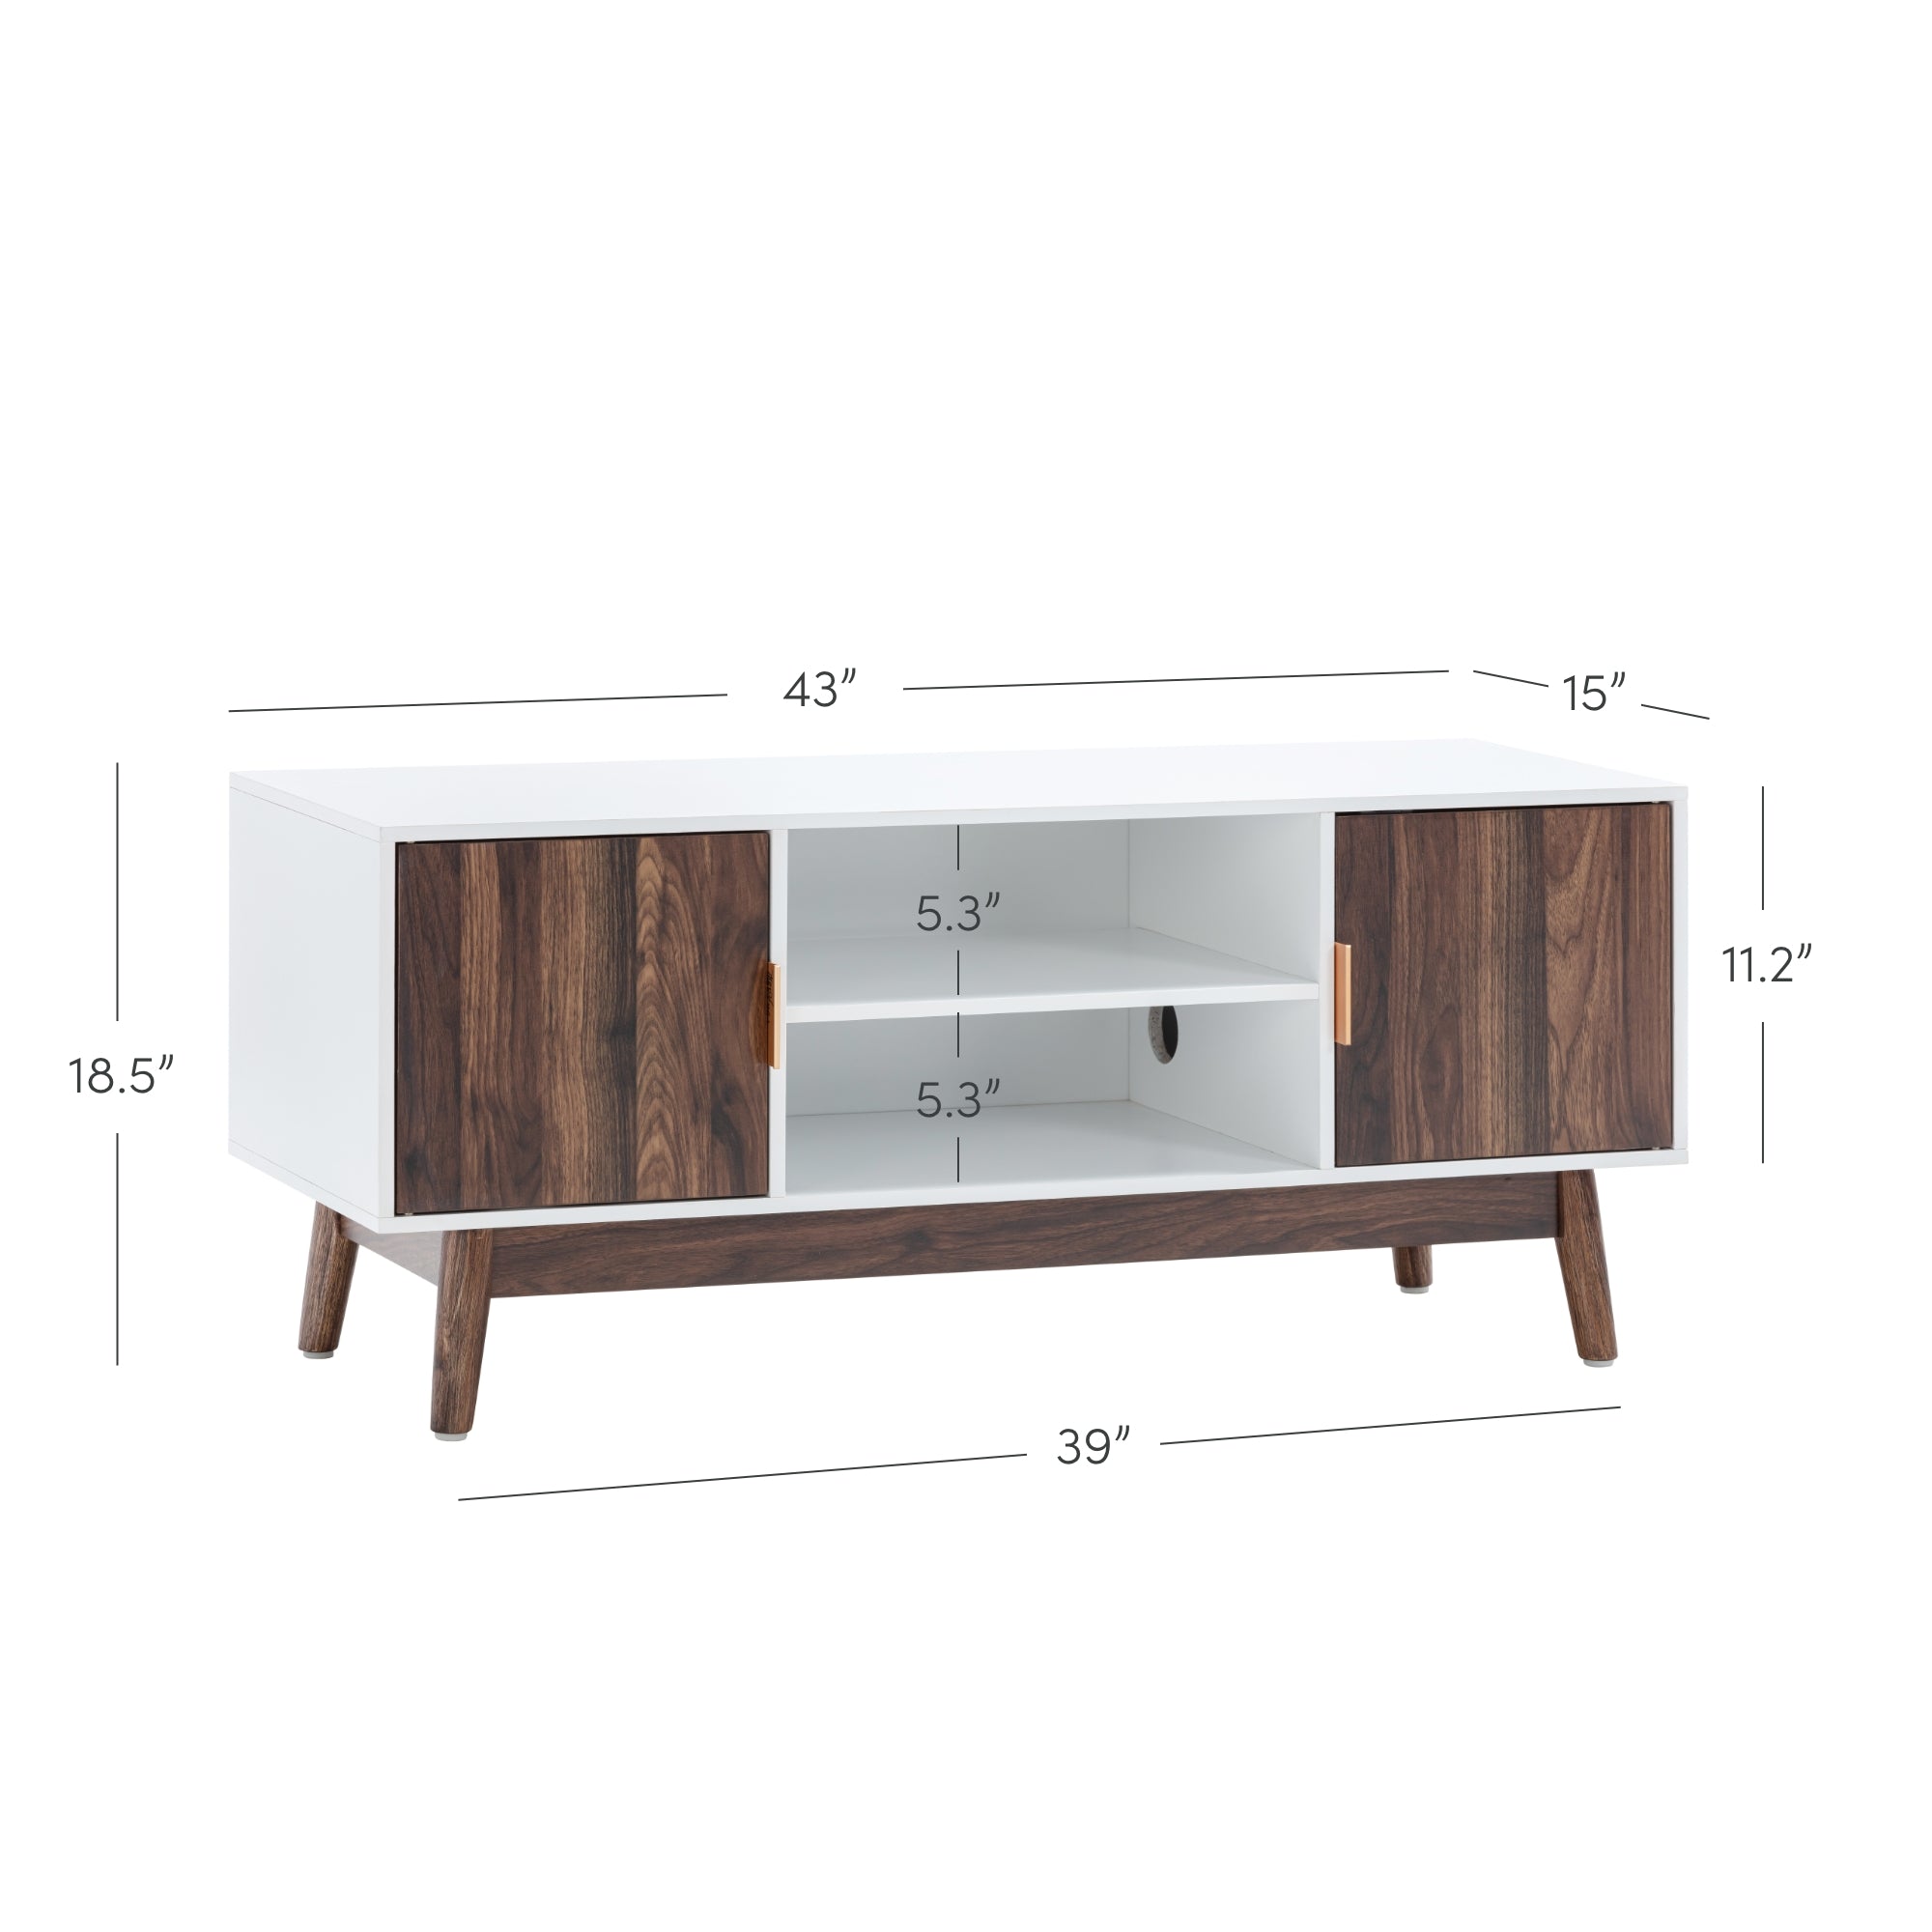 Signature White 190cm wide TV Cabinet | Self Assembly